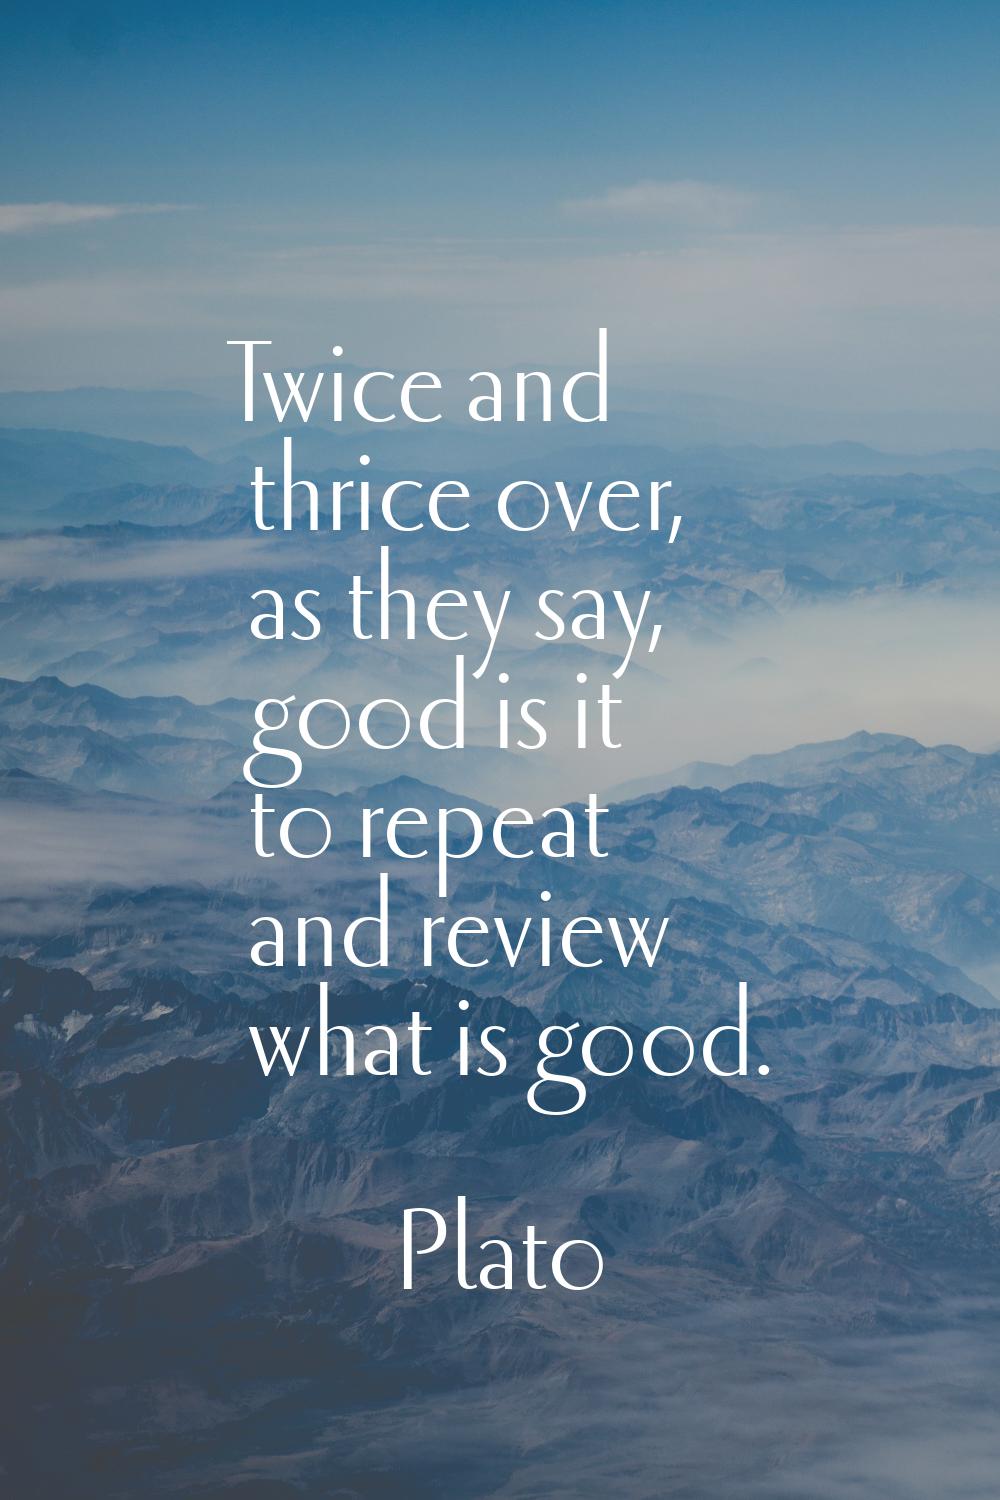 Twice and thrice over, as they say, good is it to repeat and review what is good.